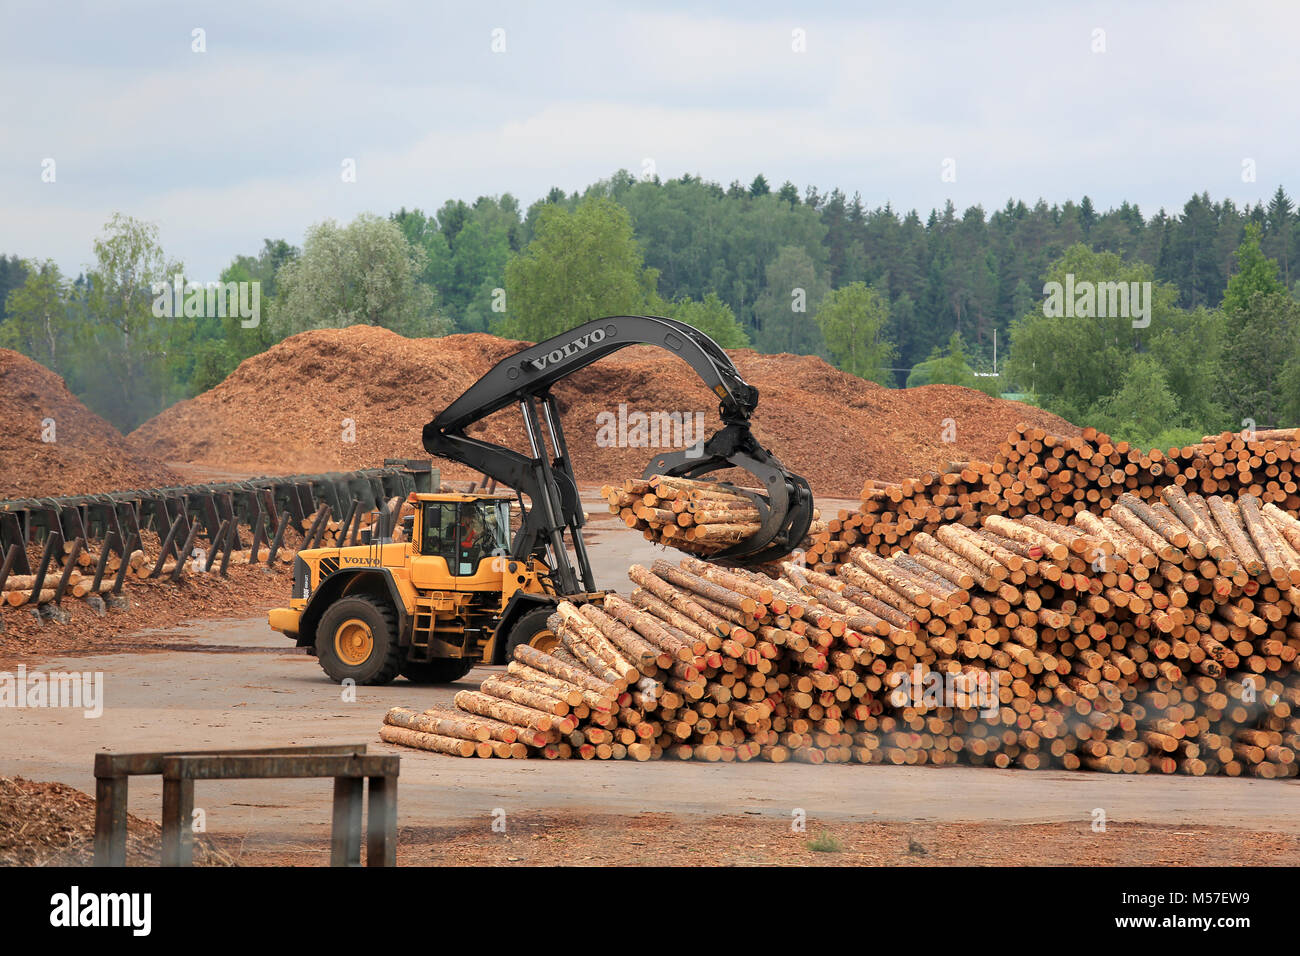 KYRO, FINLAND - JUNE 7, 2014: Volvo L180F High Lift wheel loader working at mill lumber yard.  The arm is capable of reaching a lift height of 5.8 m u Stock Photo